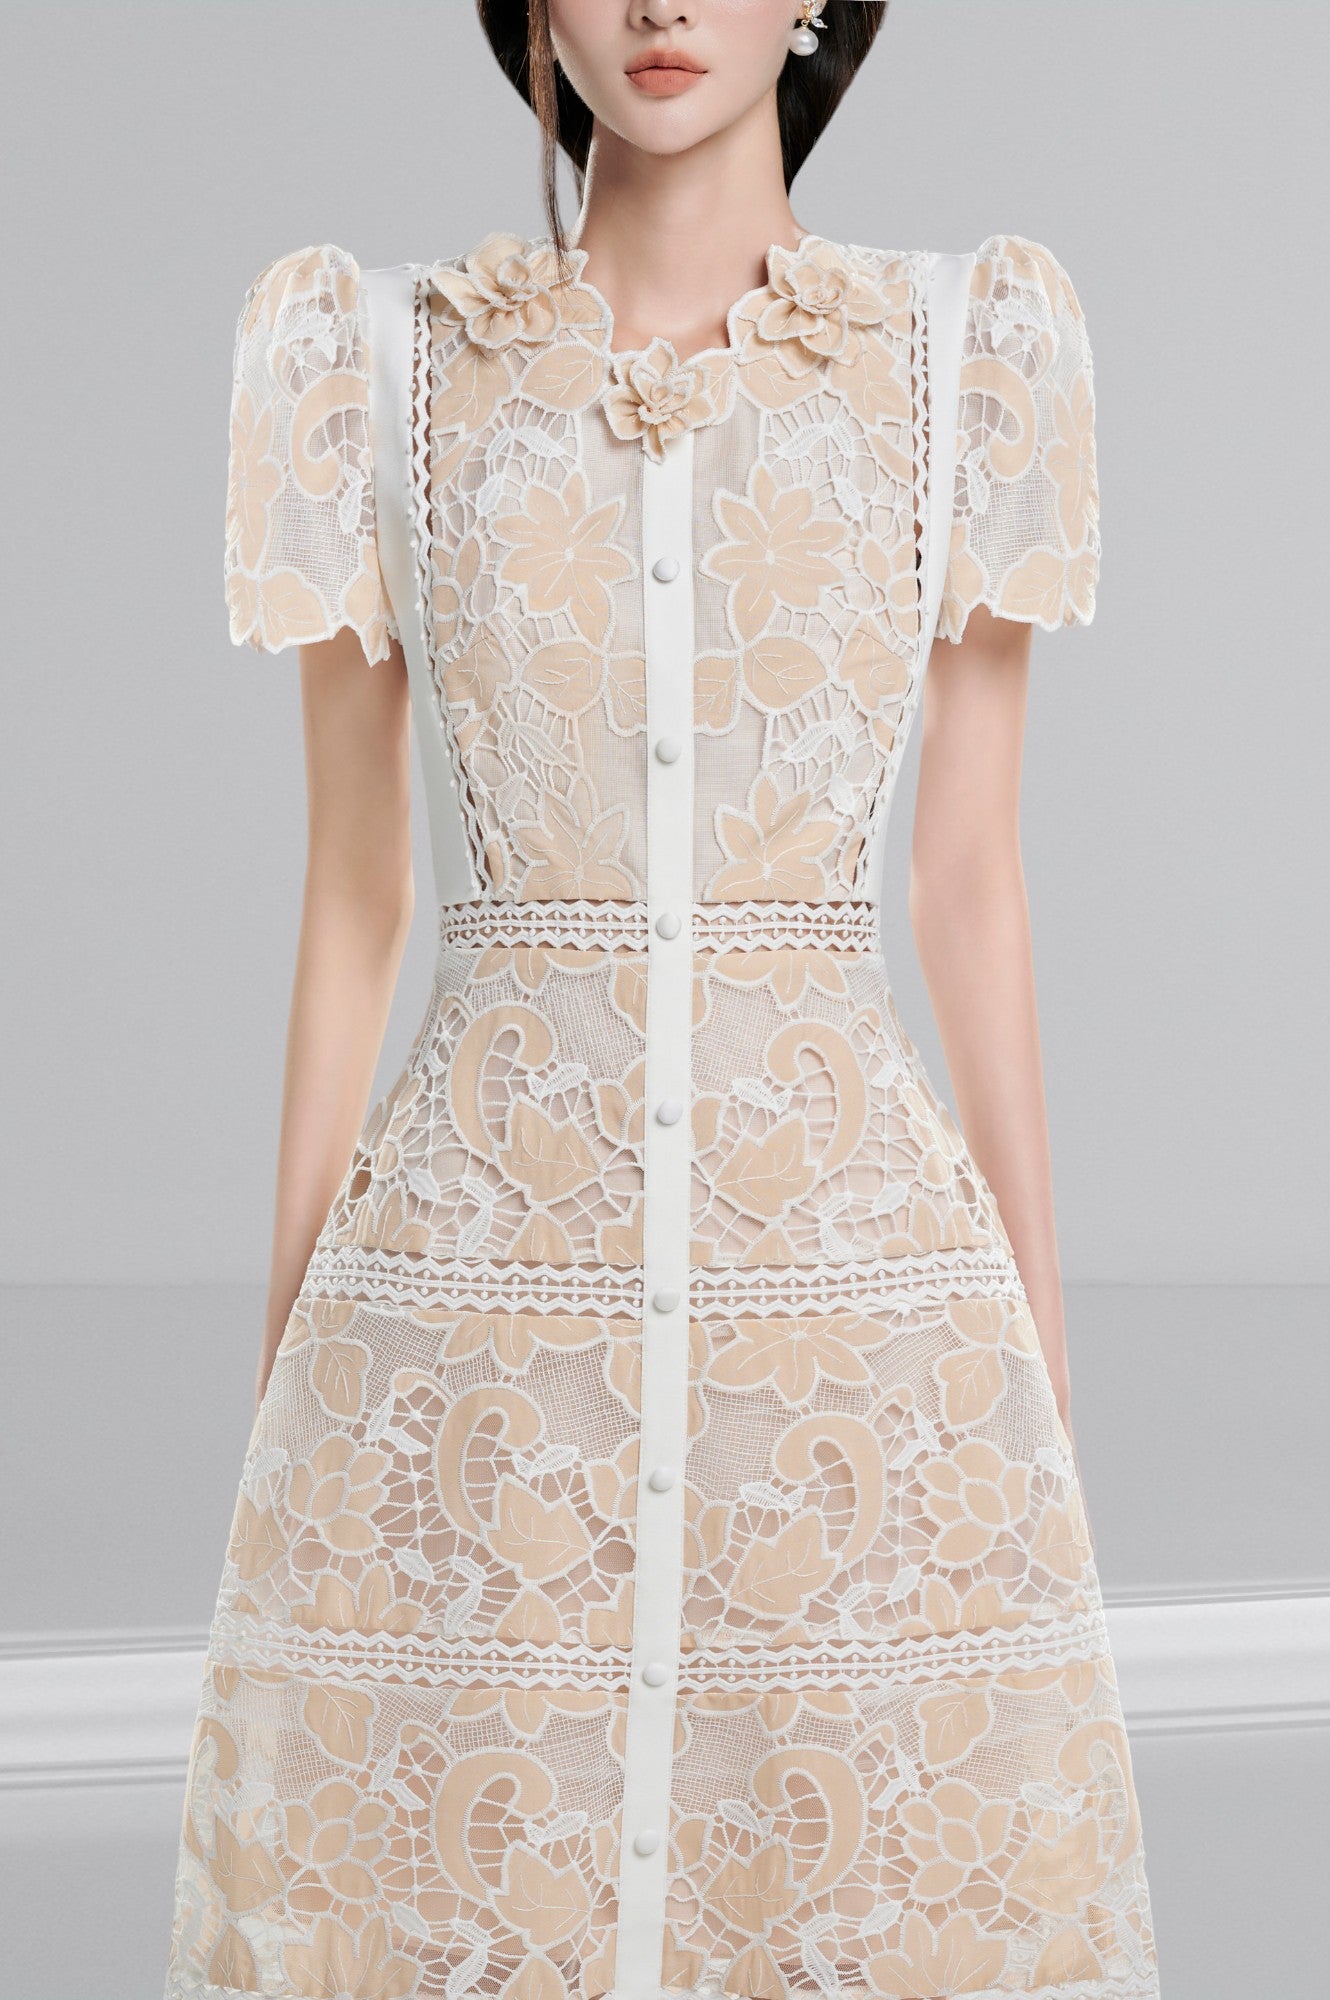  Dress Embroidery Flower Lace Hollow Out Short Sleeve Zipper Round Collar Dresses  | REBECCA WARDROBE